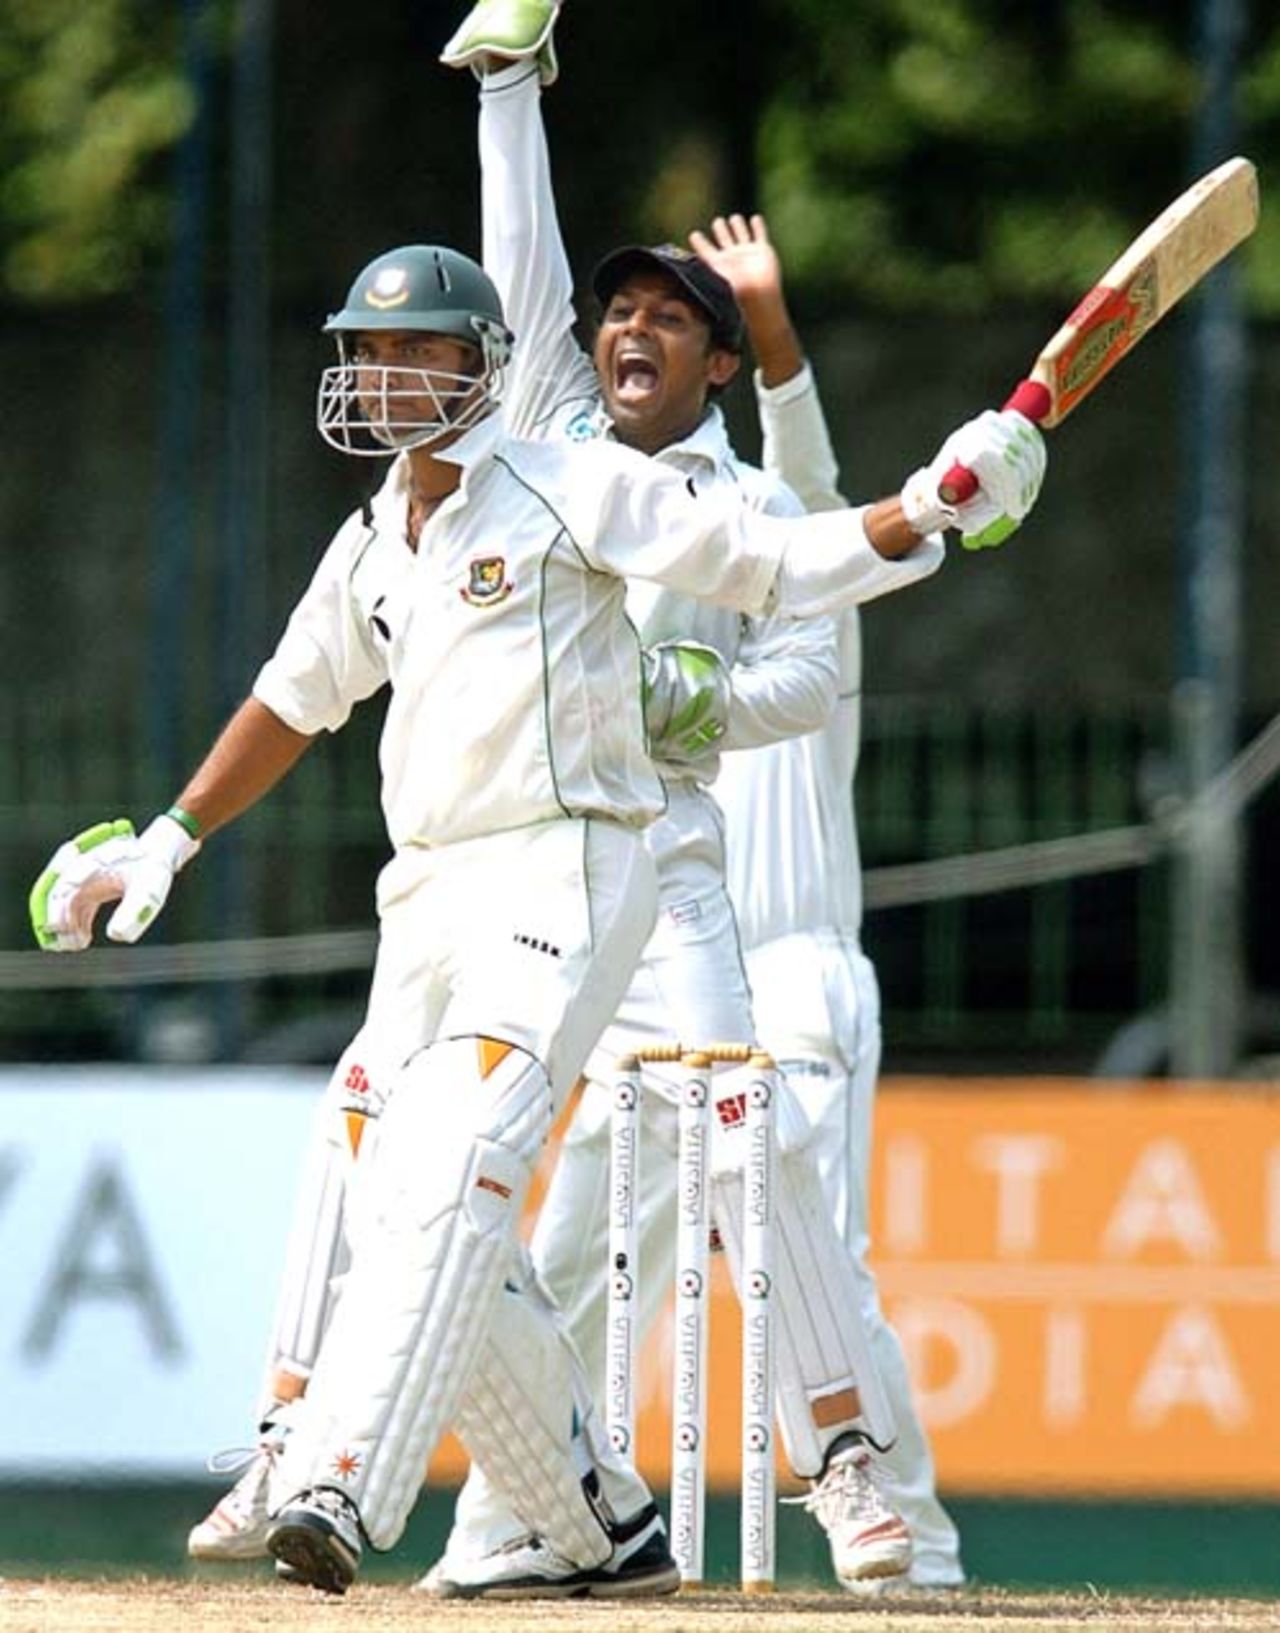 Prasanna Jayawardene successfully appeals for an lbw as Mashrafe Mortaza is trapped in front by Muralitharan, Sri Lanka v Bangladesh, 1st Test, Colombo, 4th day, June 28, 2007